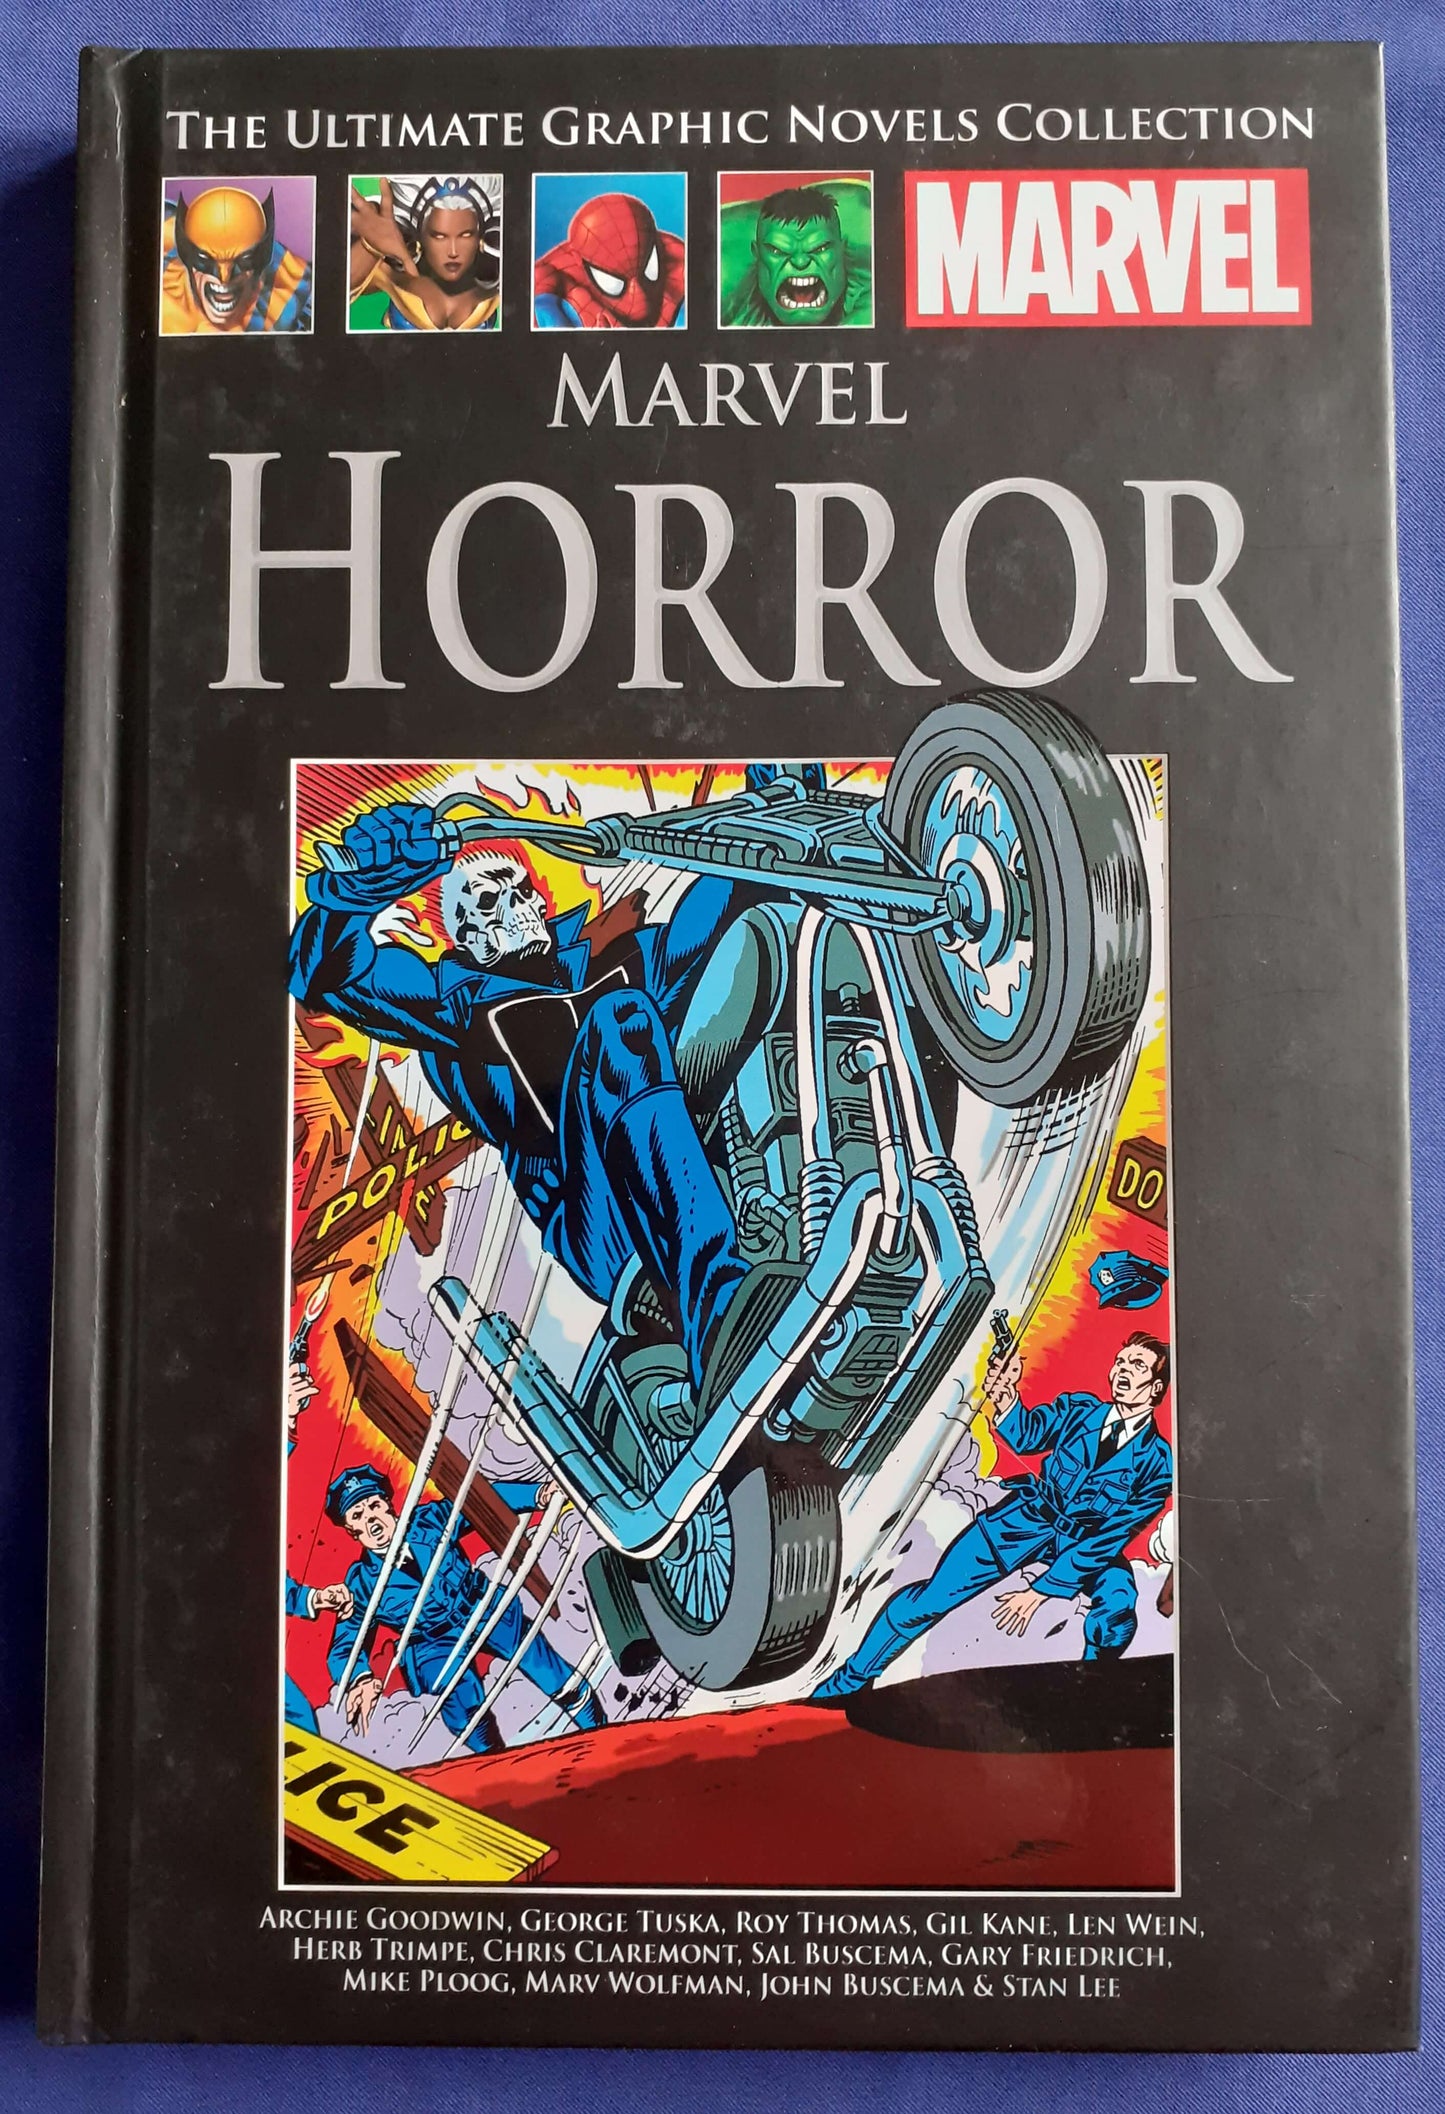 dracula, ghost rider, graphic novel, horror comics, marvel graphic novels, marvel horror, marvel ultimate graphic collection, son of satan - Best Books